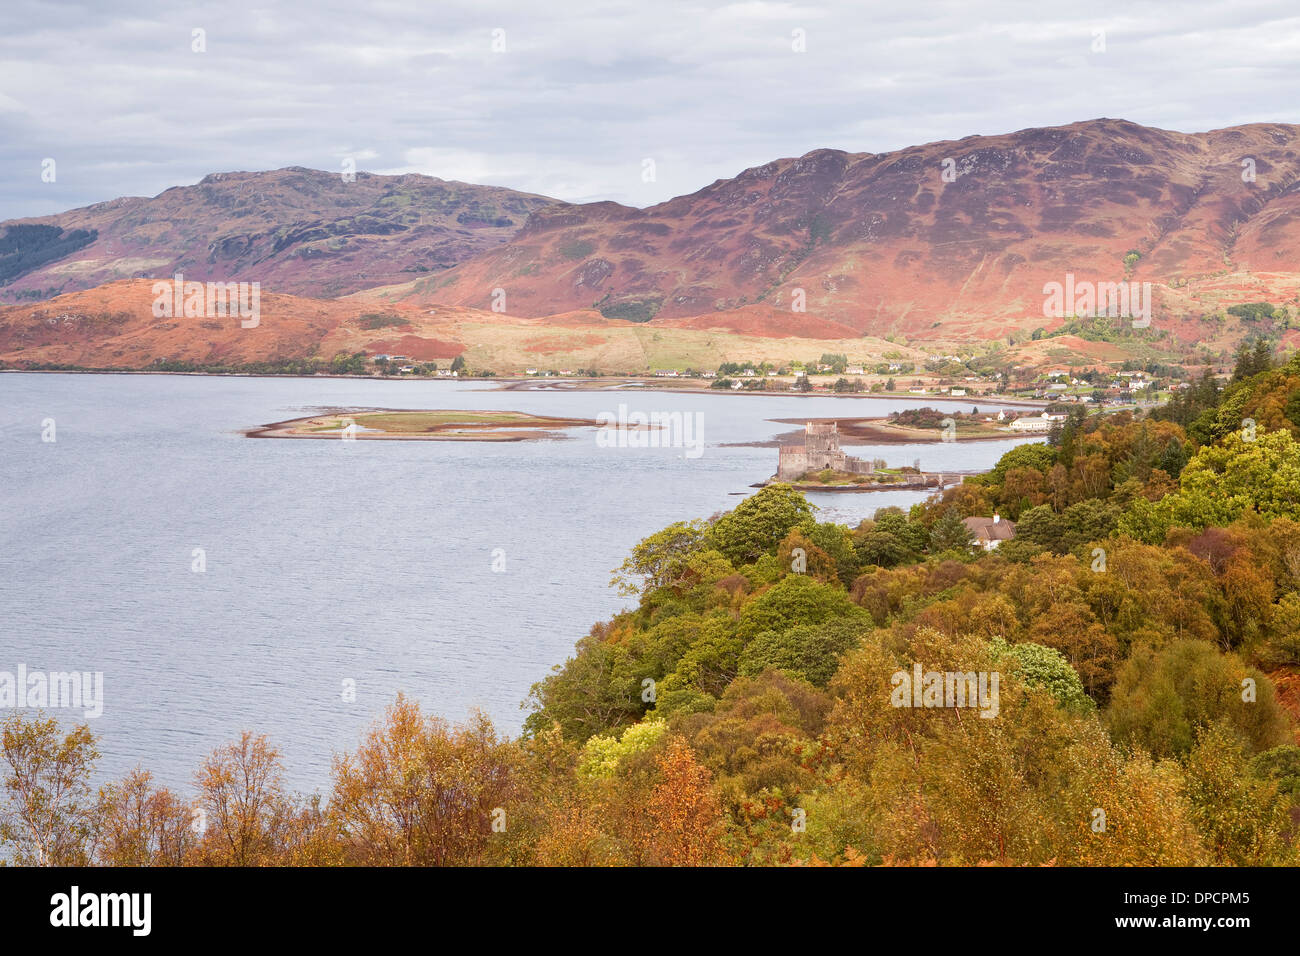 Eilean Donan castle and the waters of Loch Duich. Stock Photo